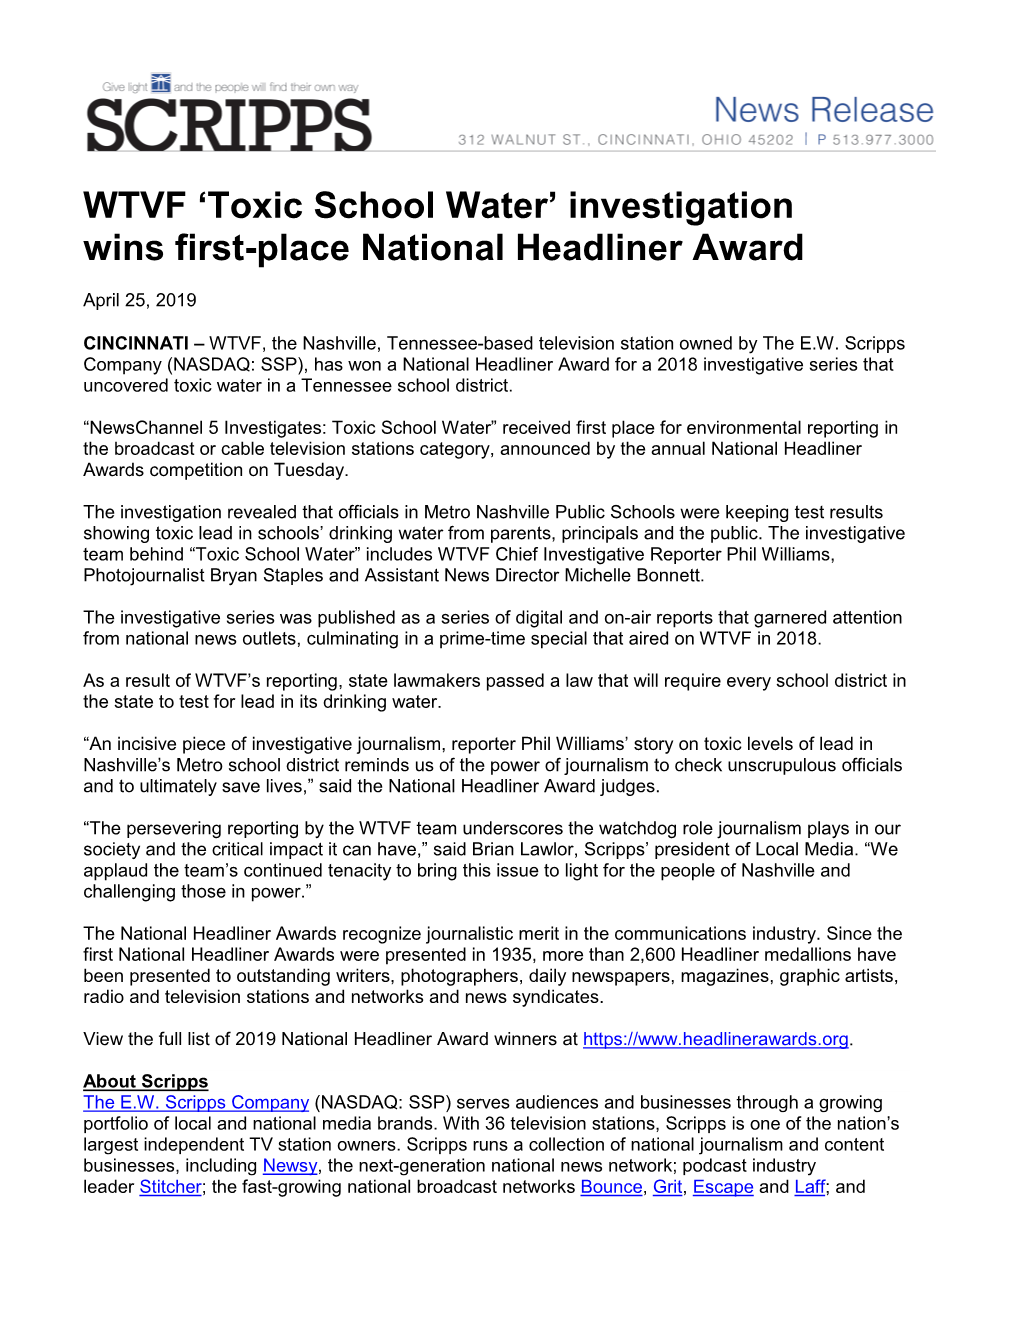 WTVF ‘Toxic School Water’ Investigation Wins First-Place National Headliner Award